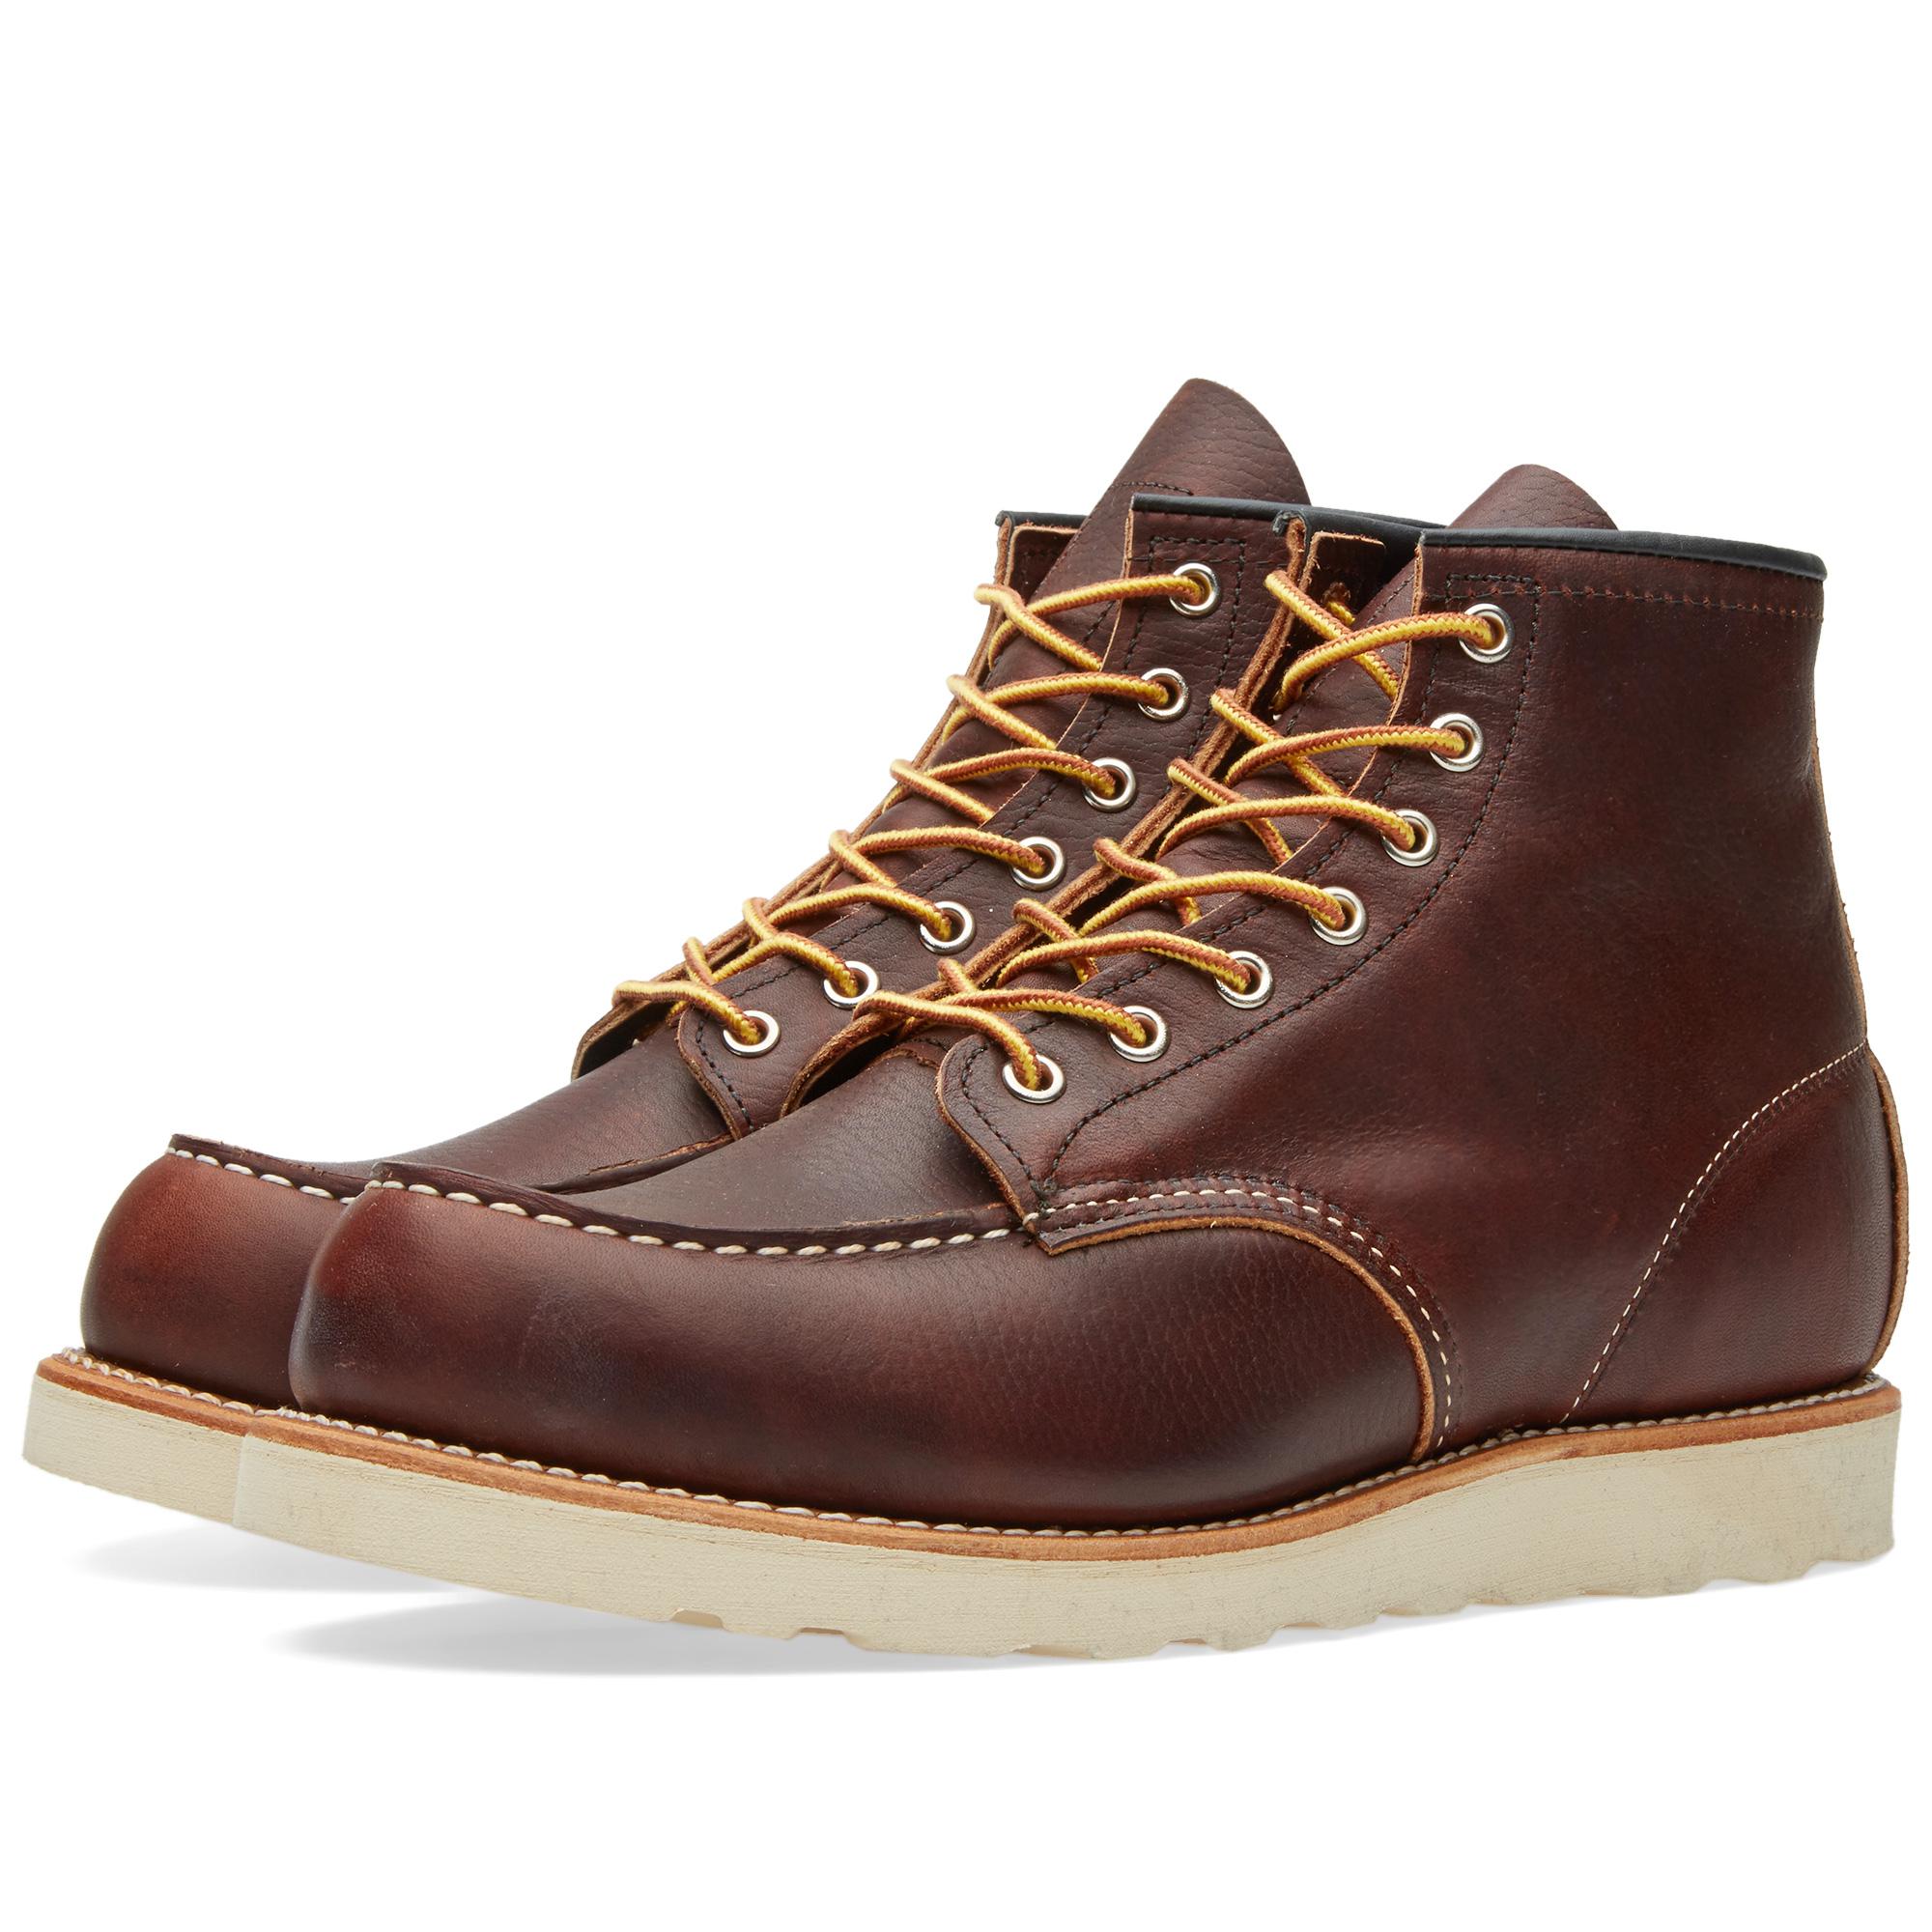 Lyst - Red Wing 8138 Heritage Work 6